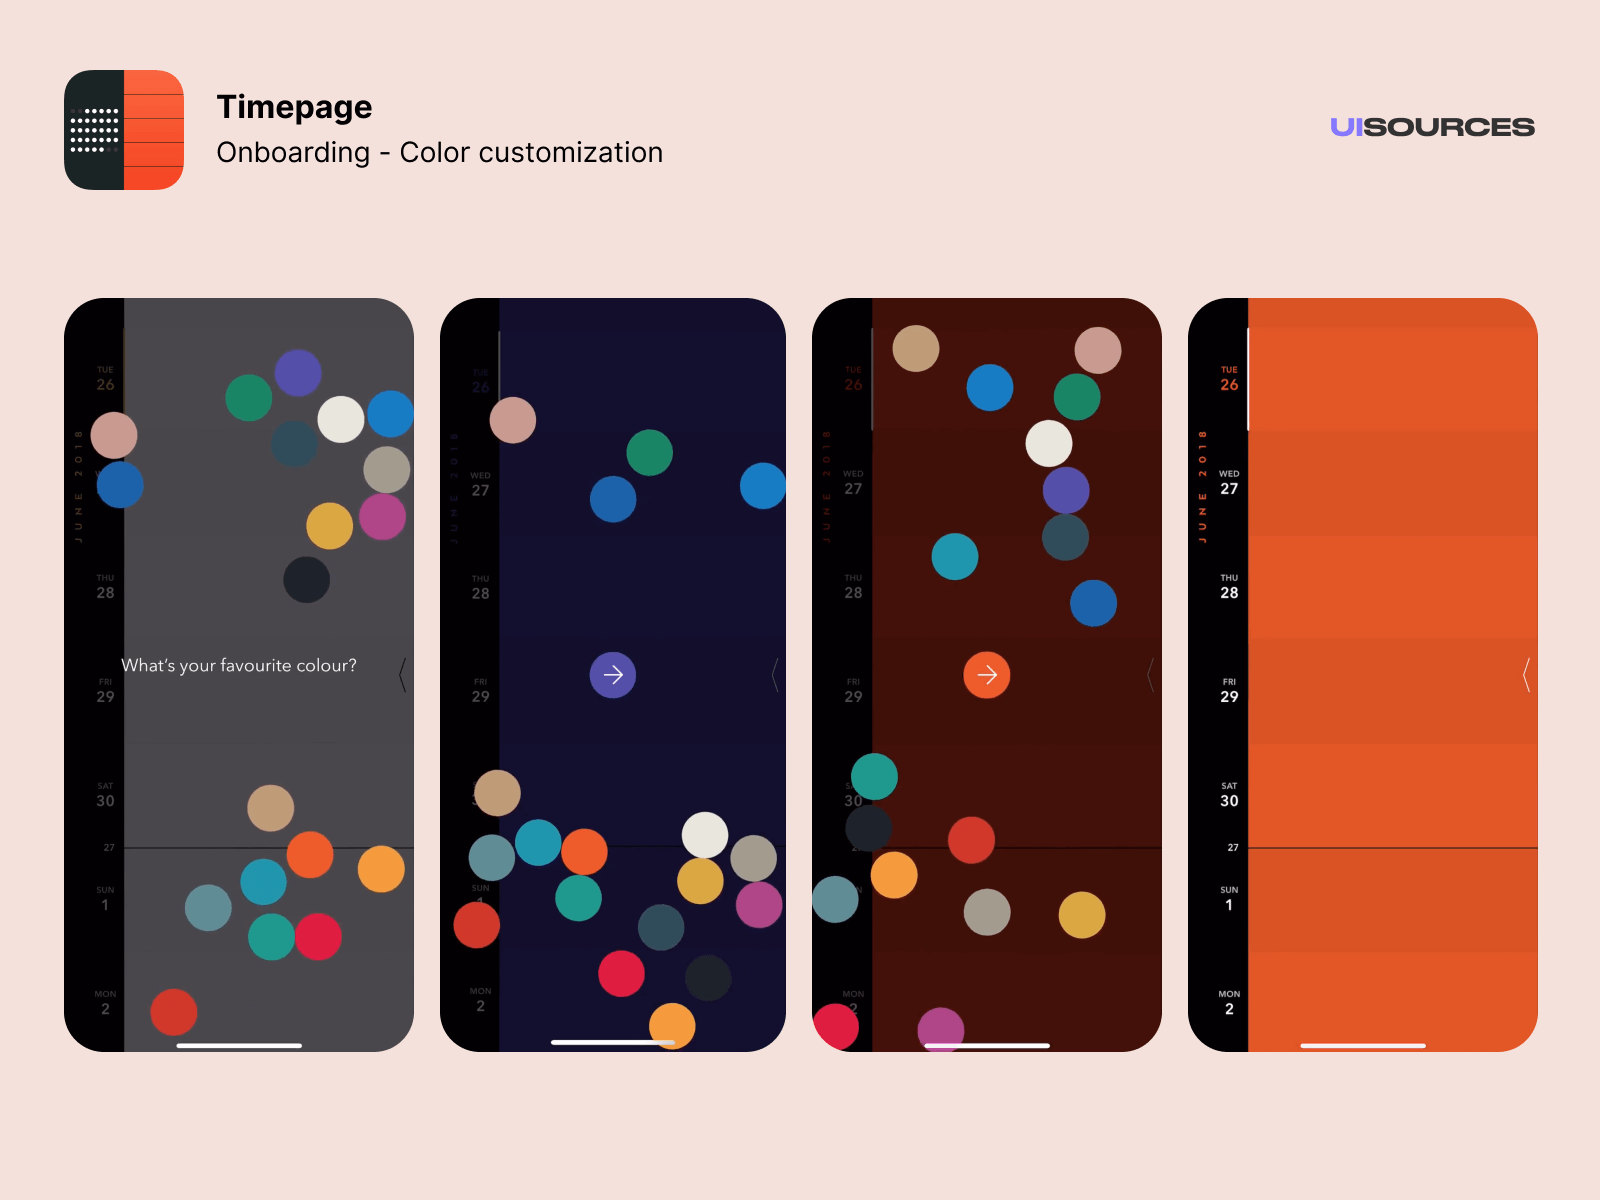 Pick your favourite color to customize the app